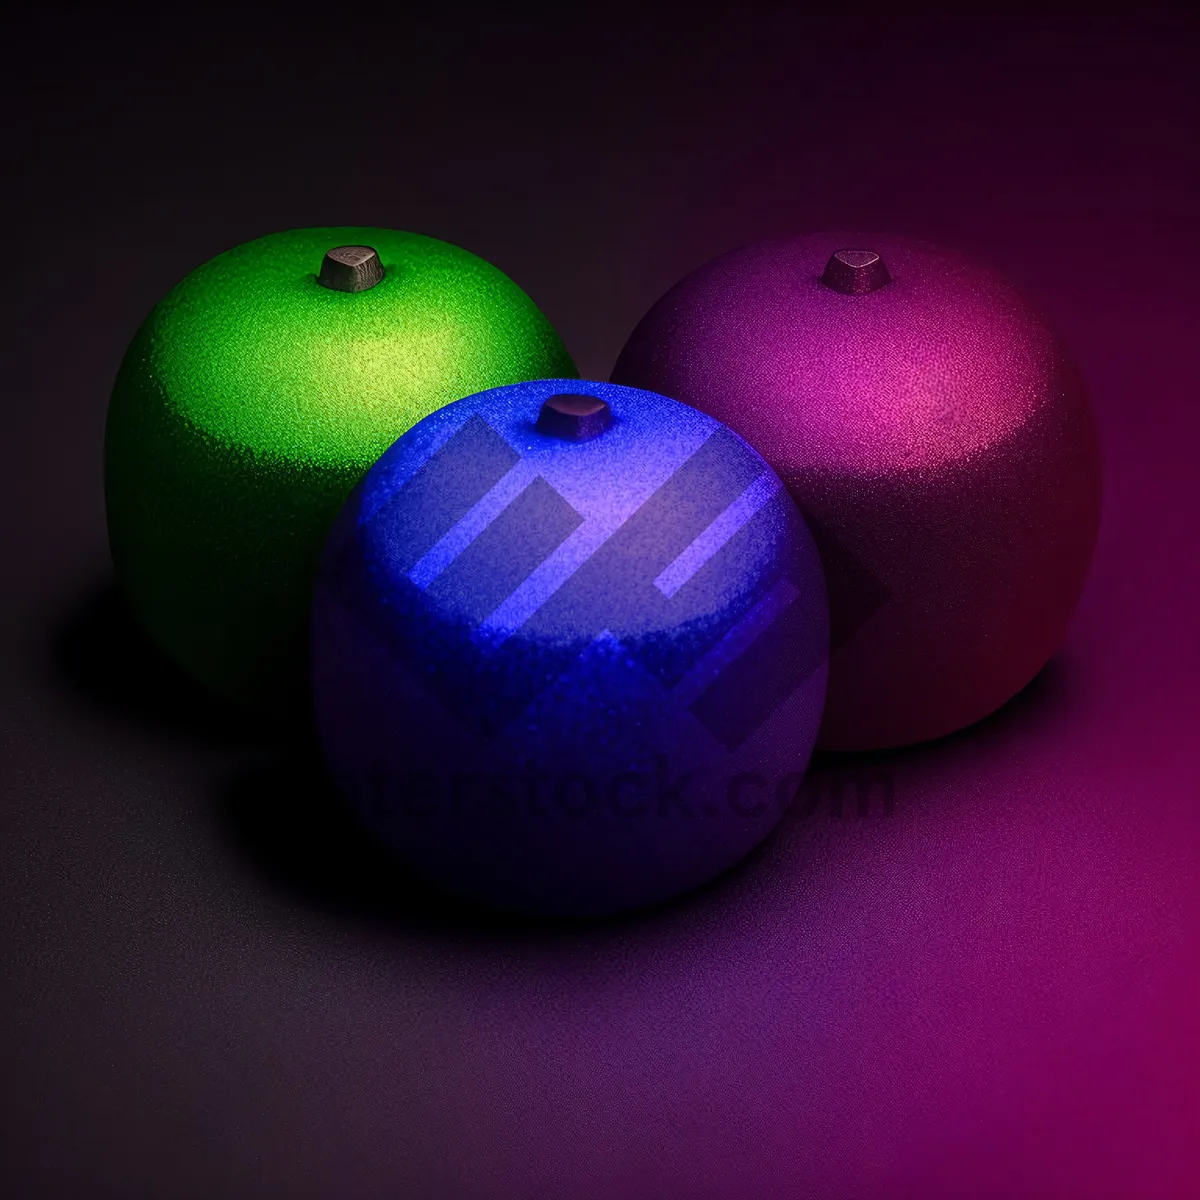 Picture of Colorful Sphere of Fruit on Table